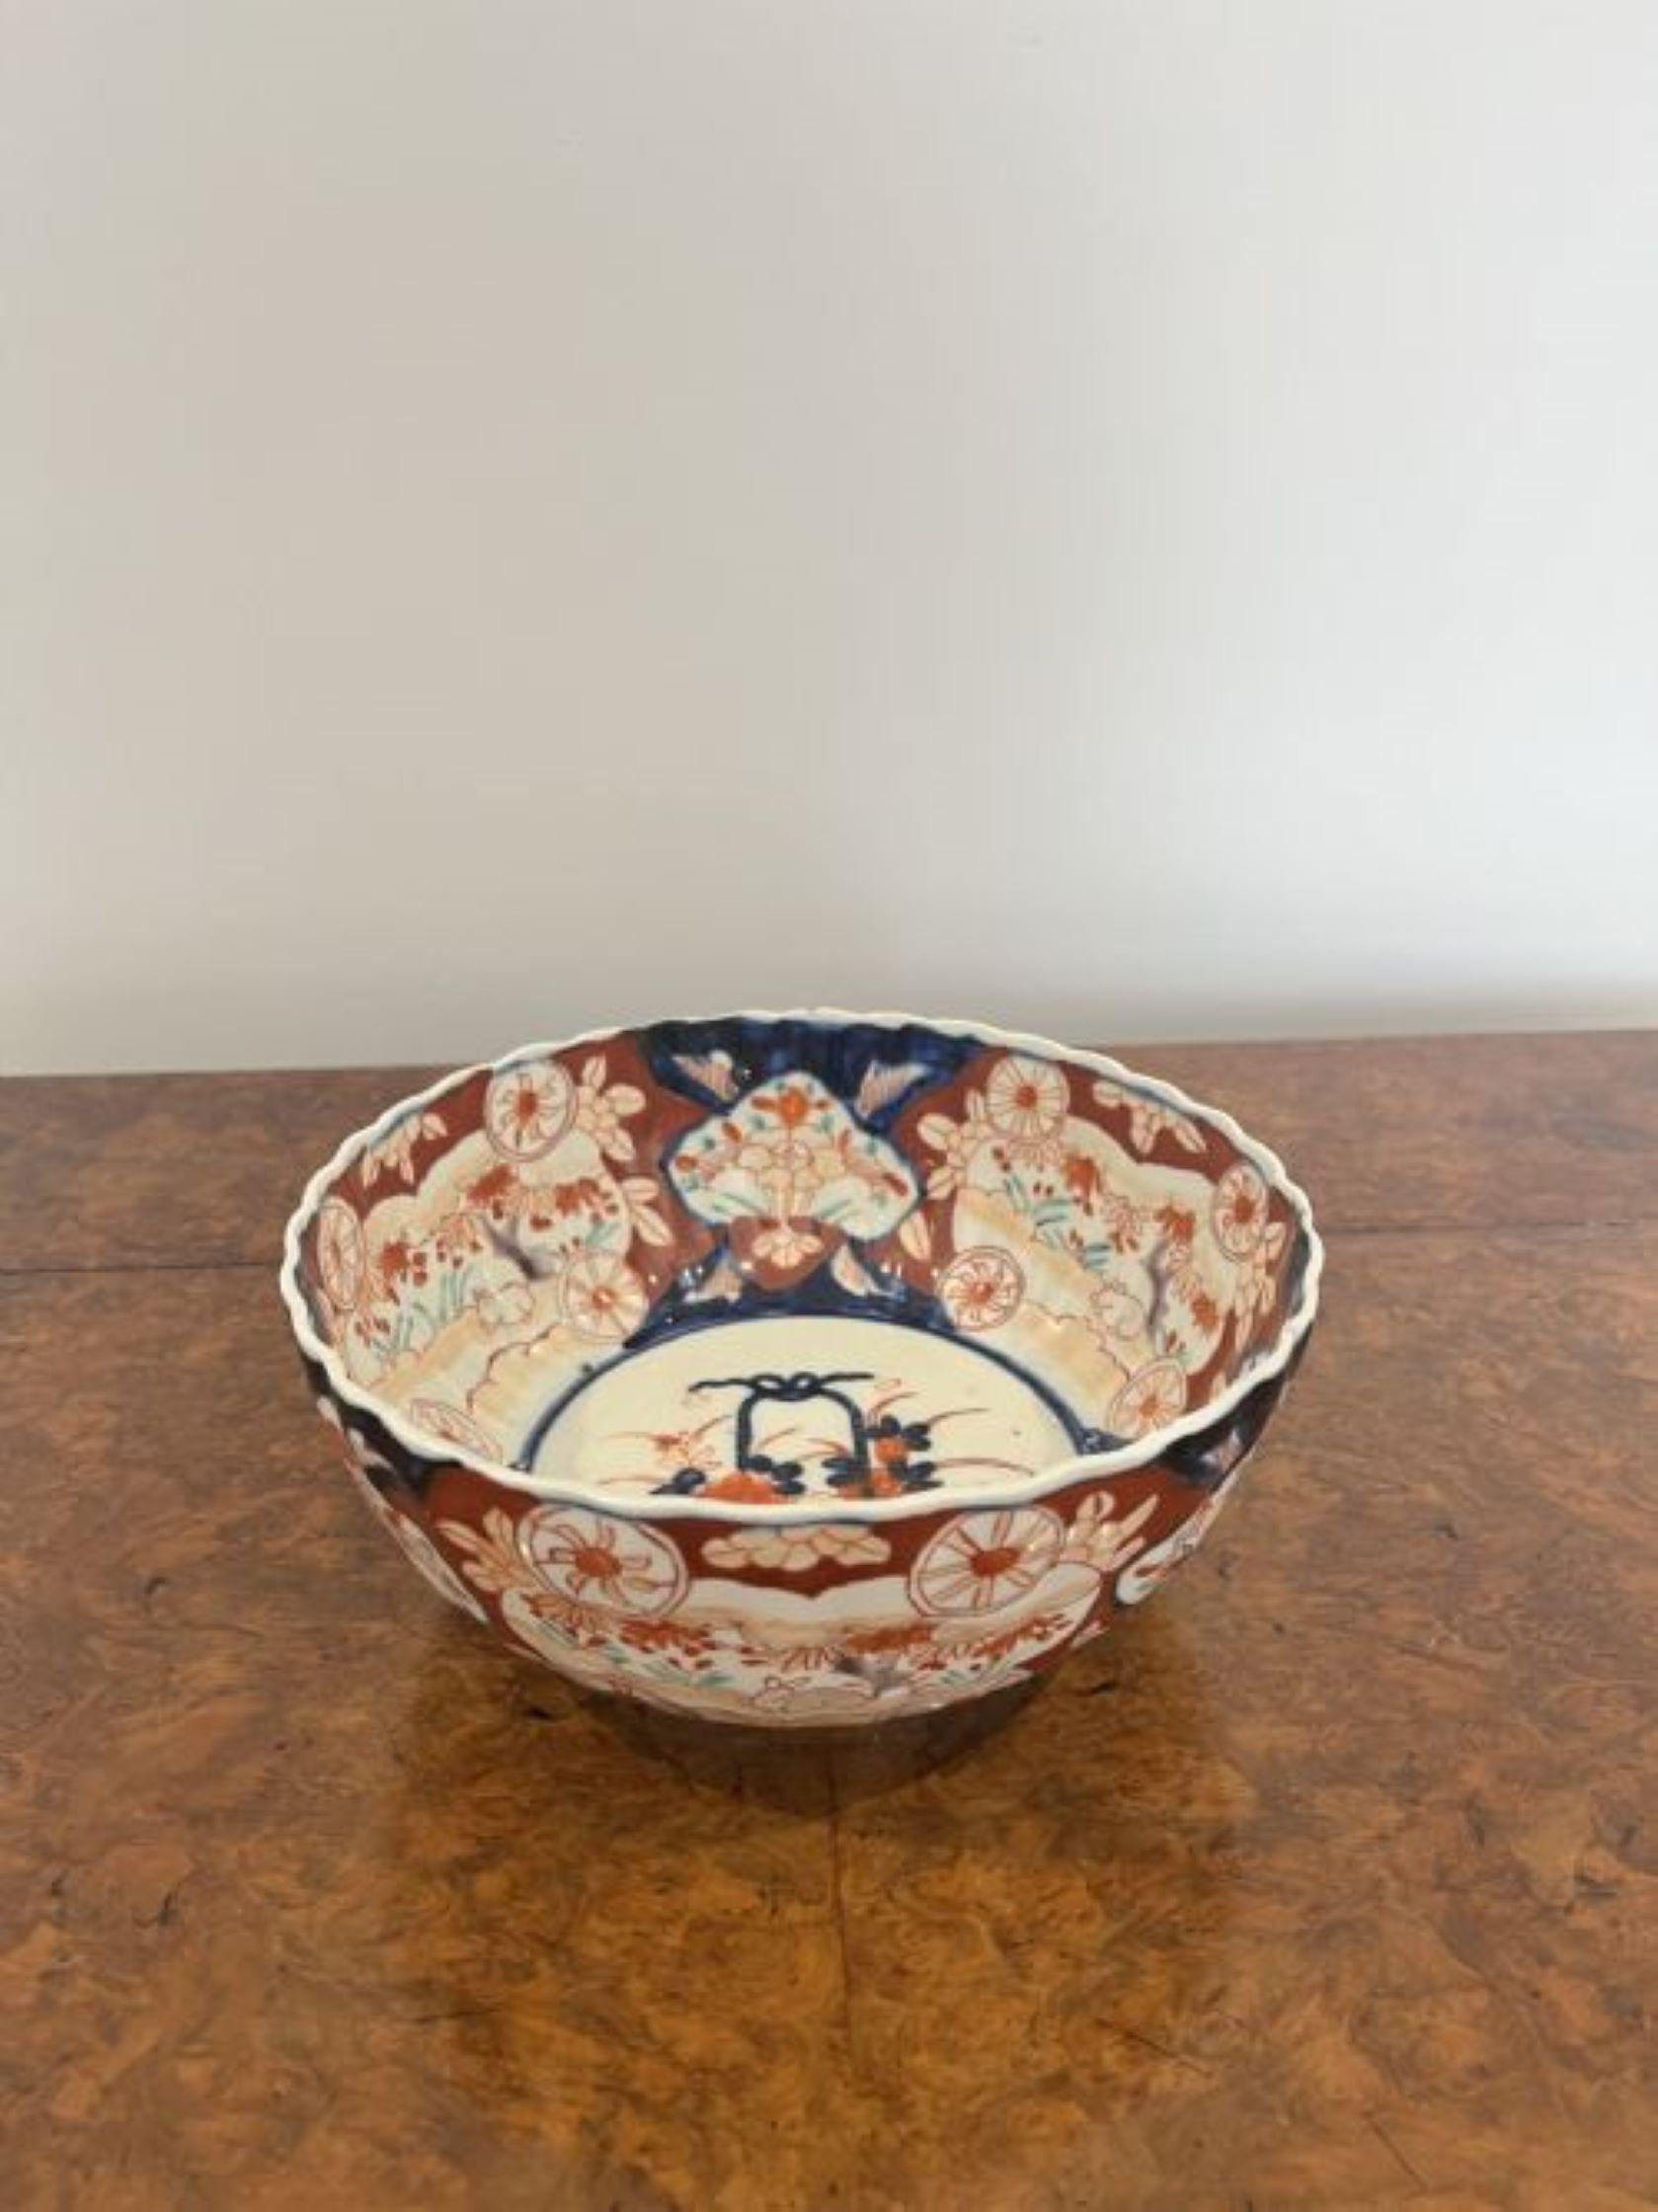 Lovely antique Japanese imari bowl with a scallop shaped edge For Sale 3